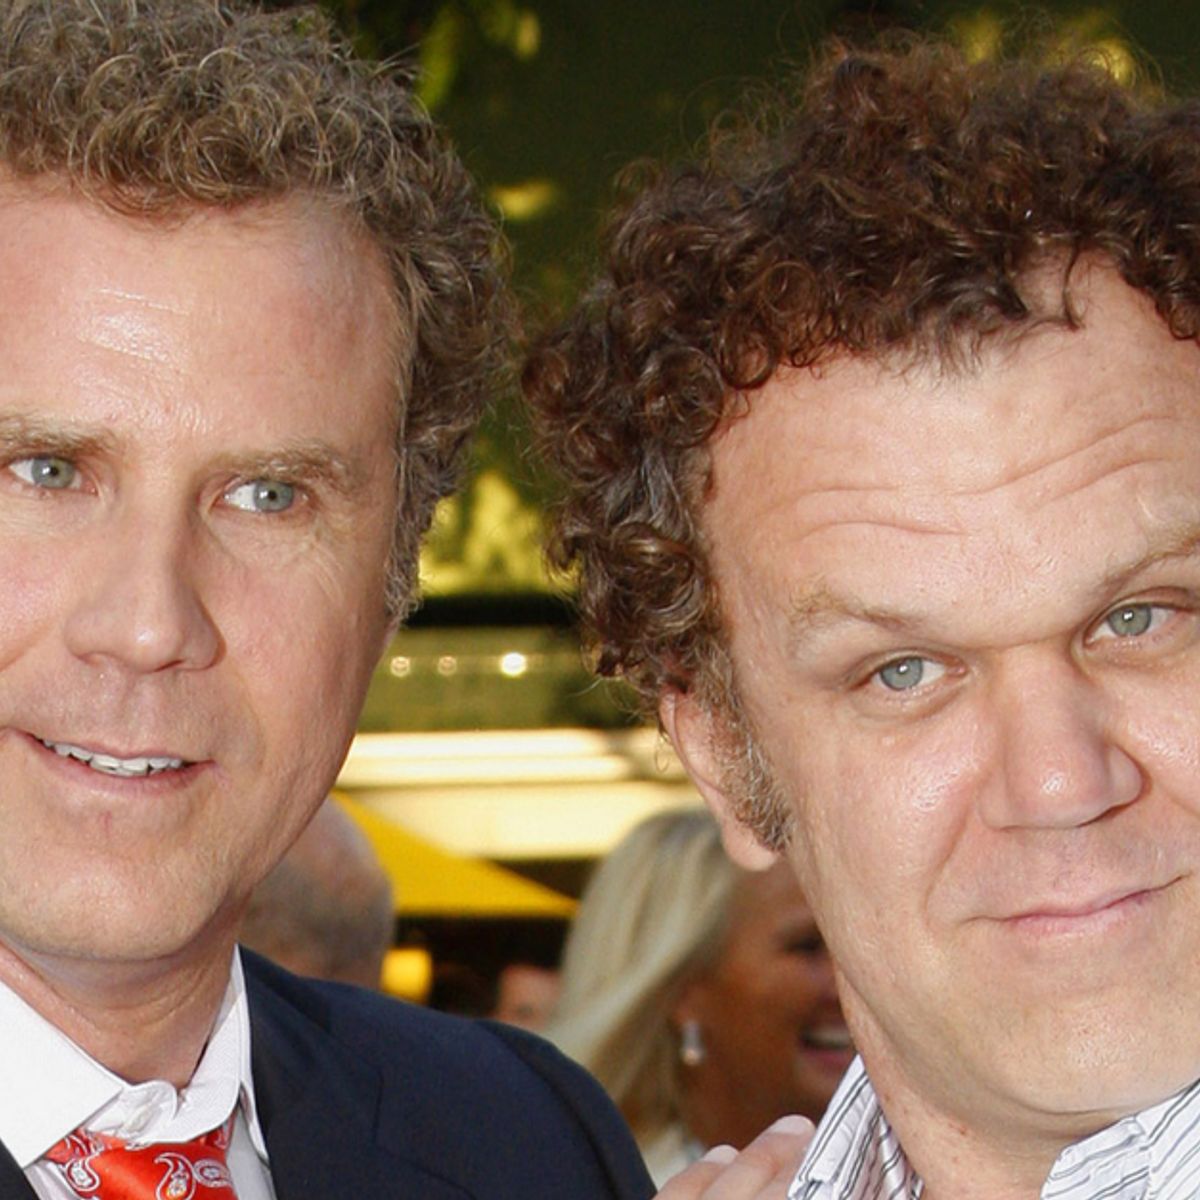 Step Brothers 2' Rumors Are False